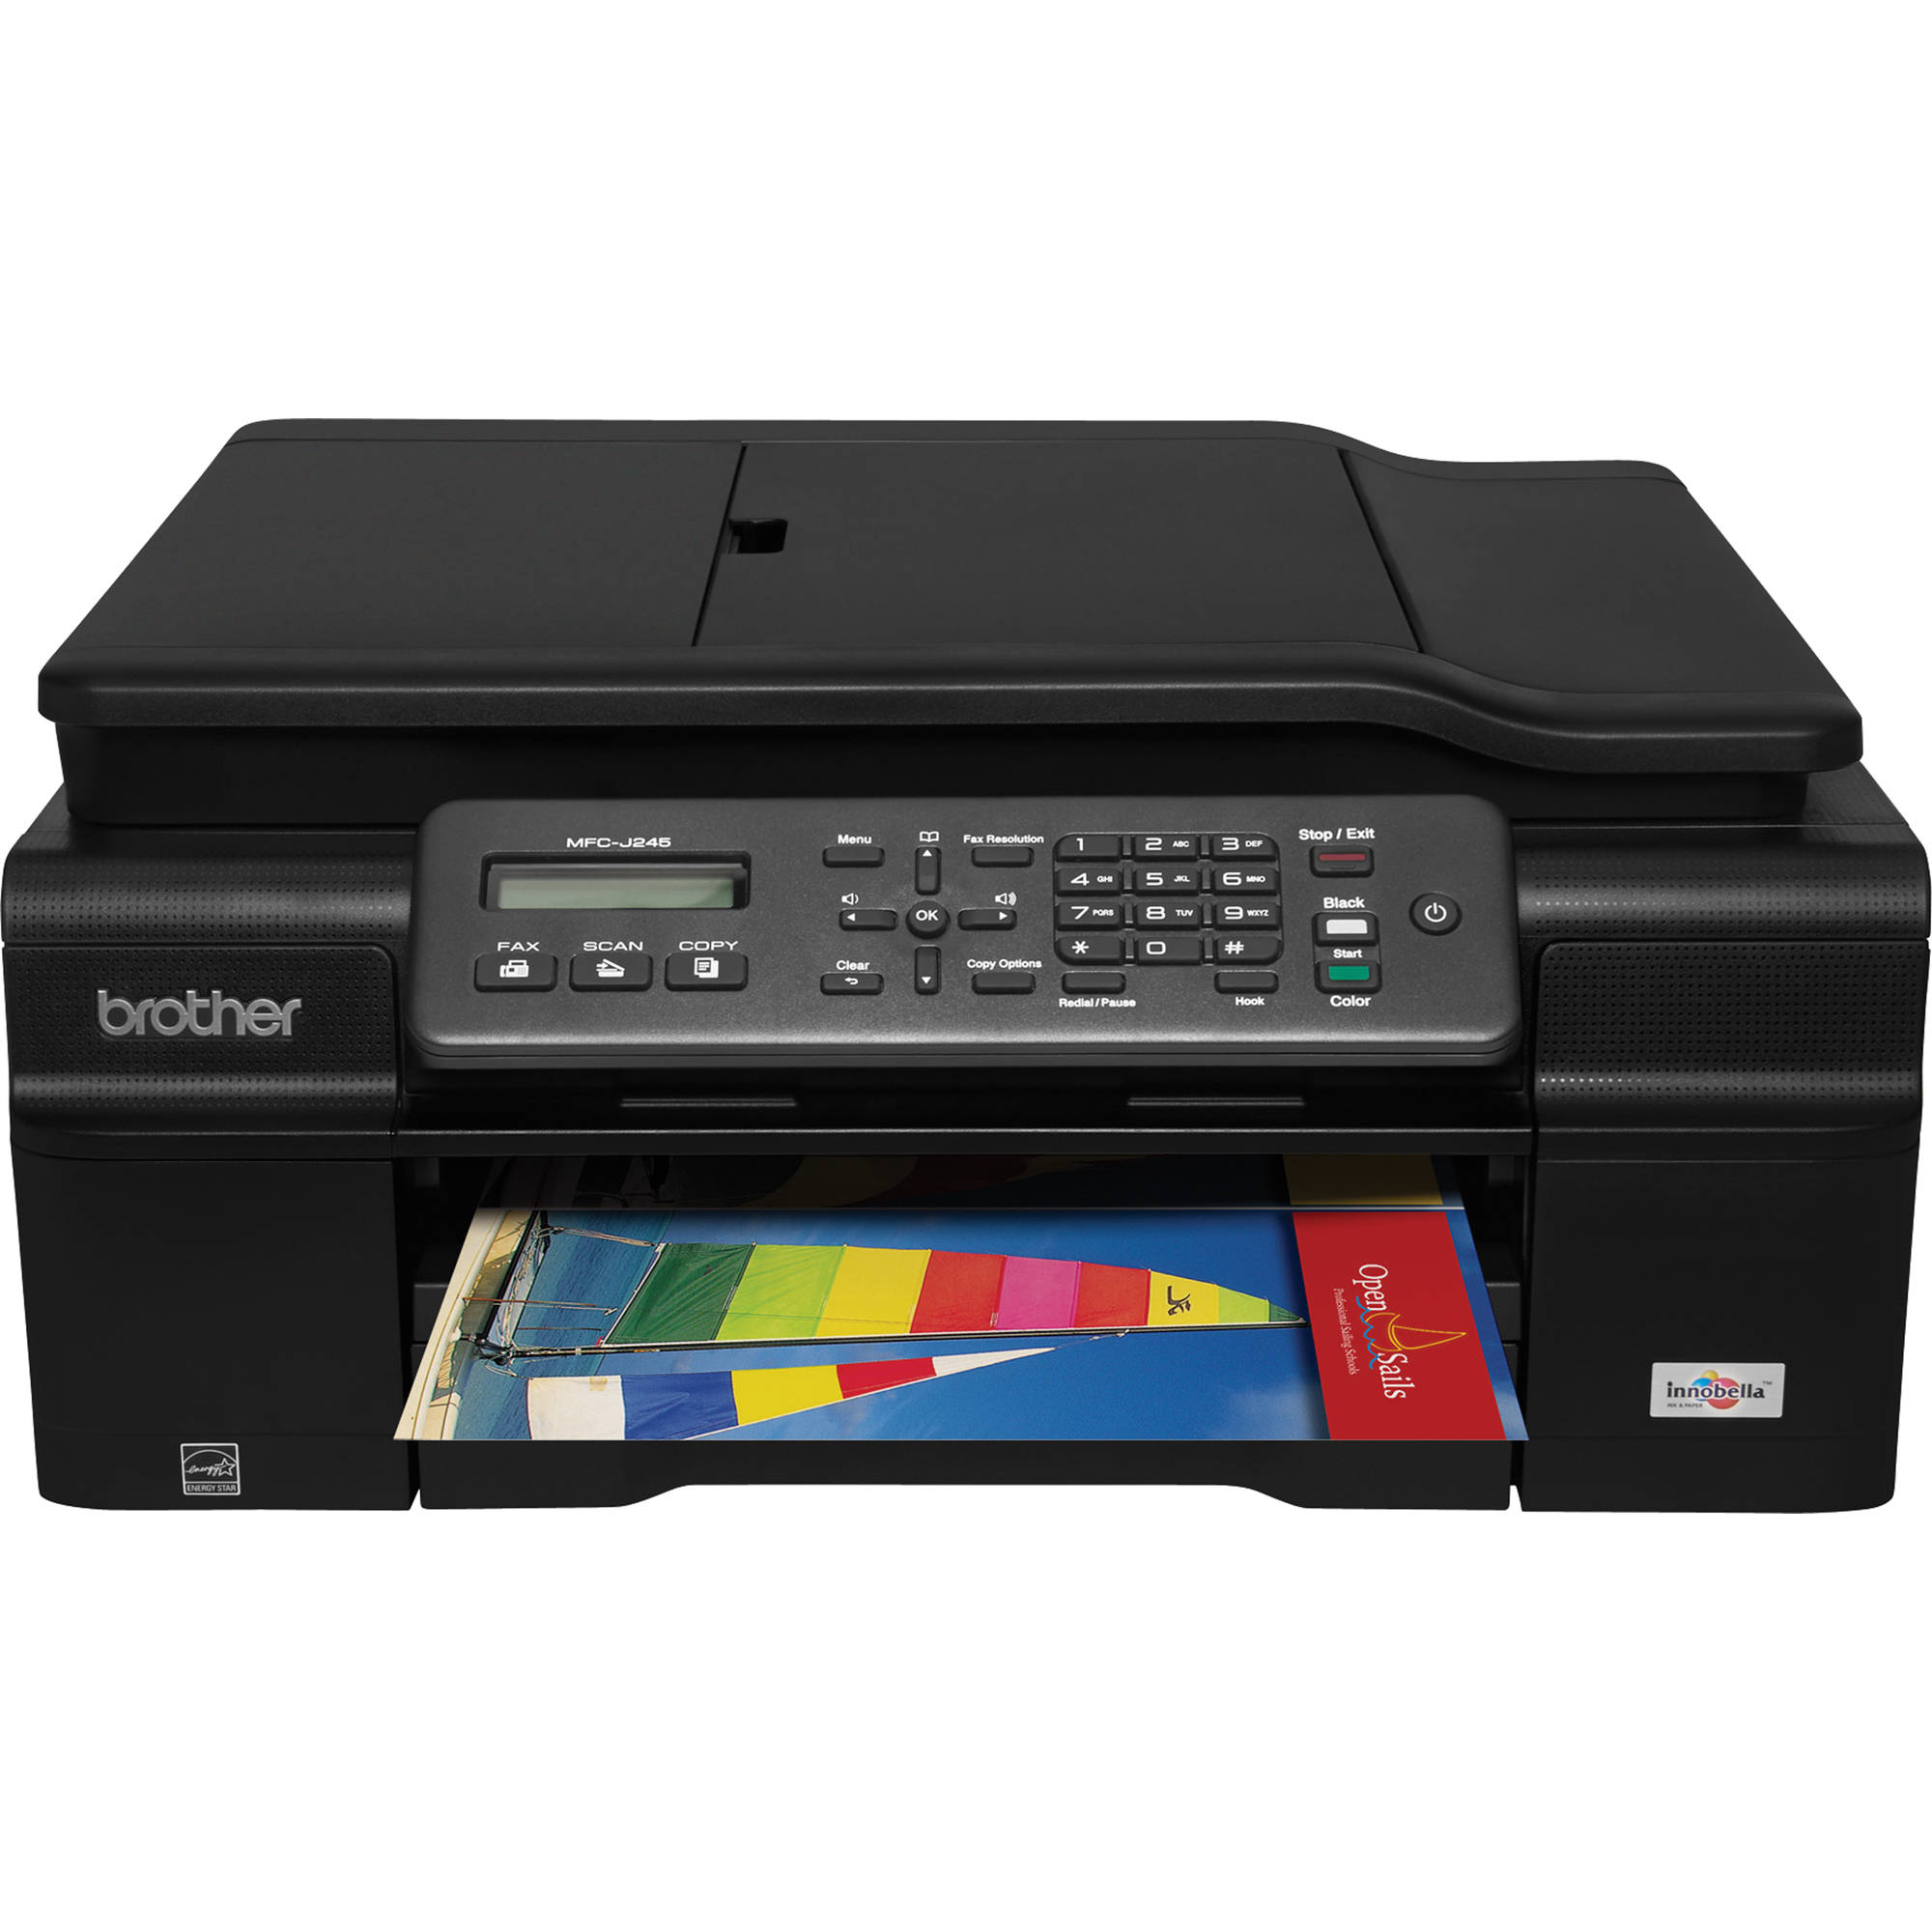 scanner software for windows 10 brother printers